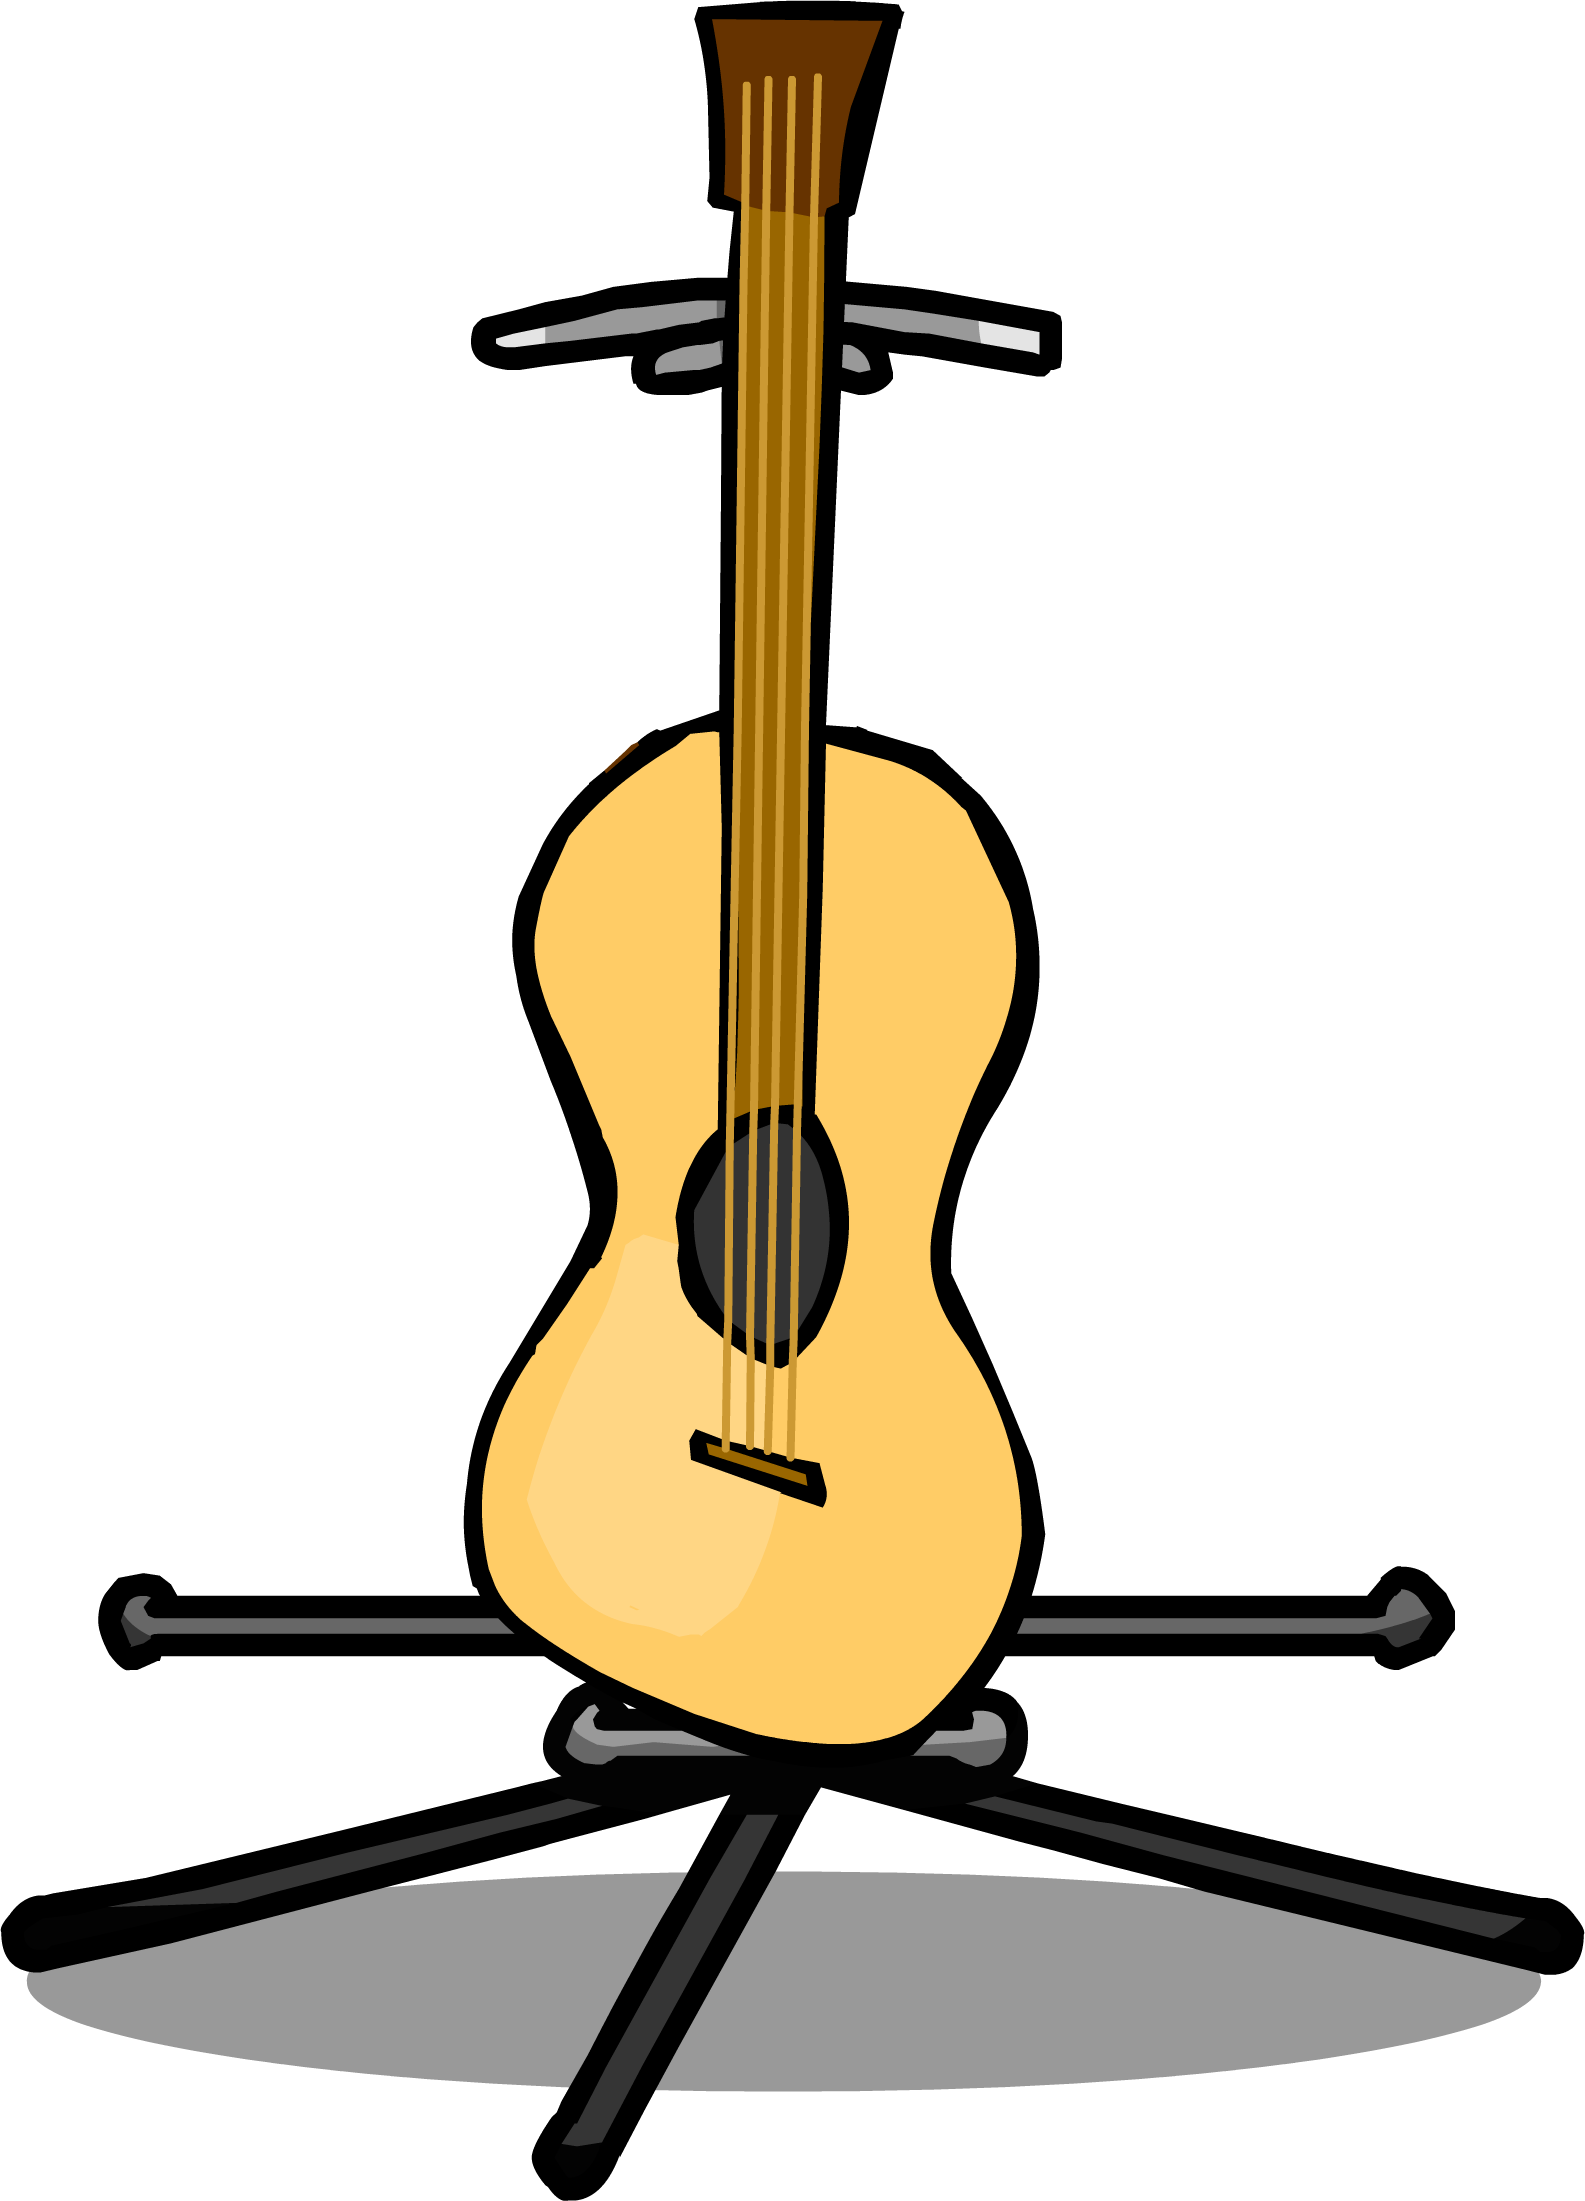 Clipart guitar file. Image stand id sprite